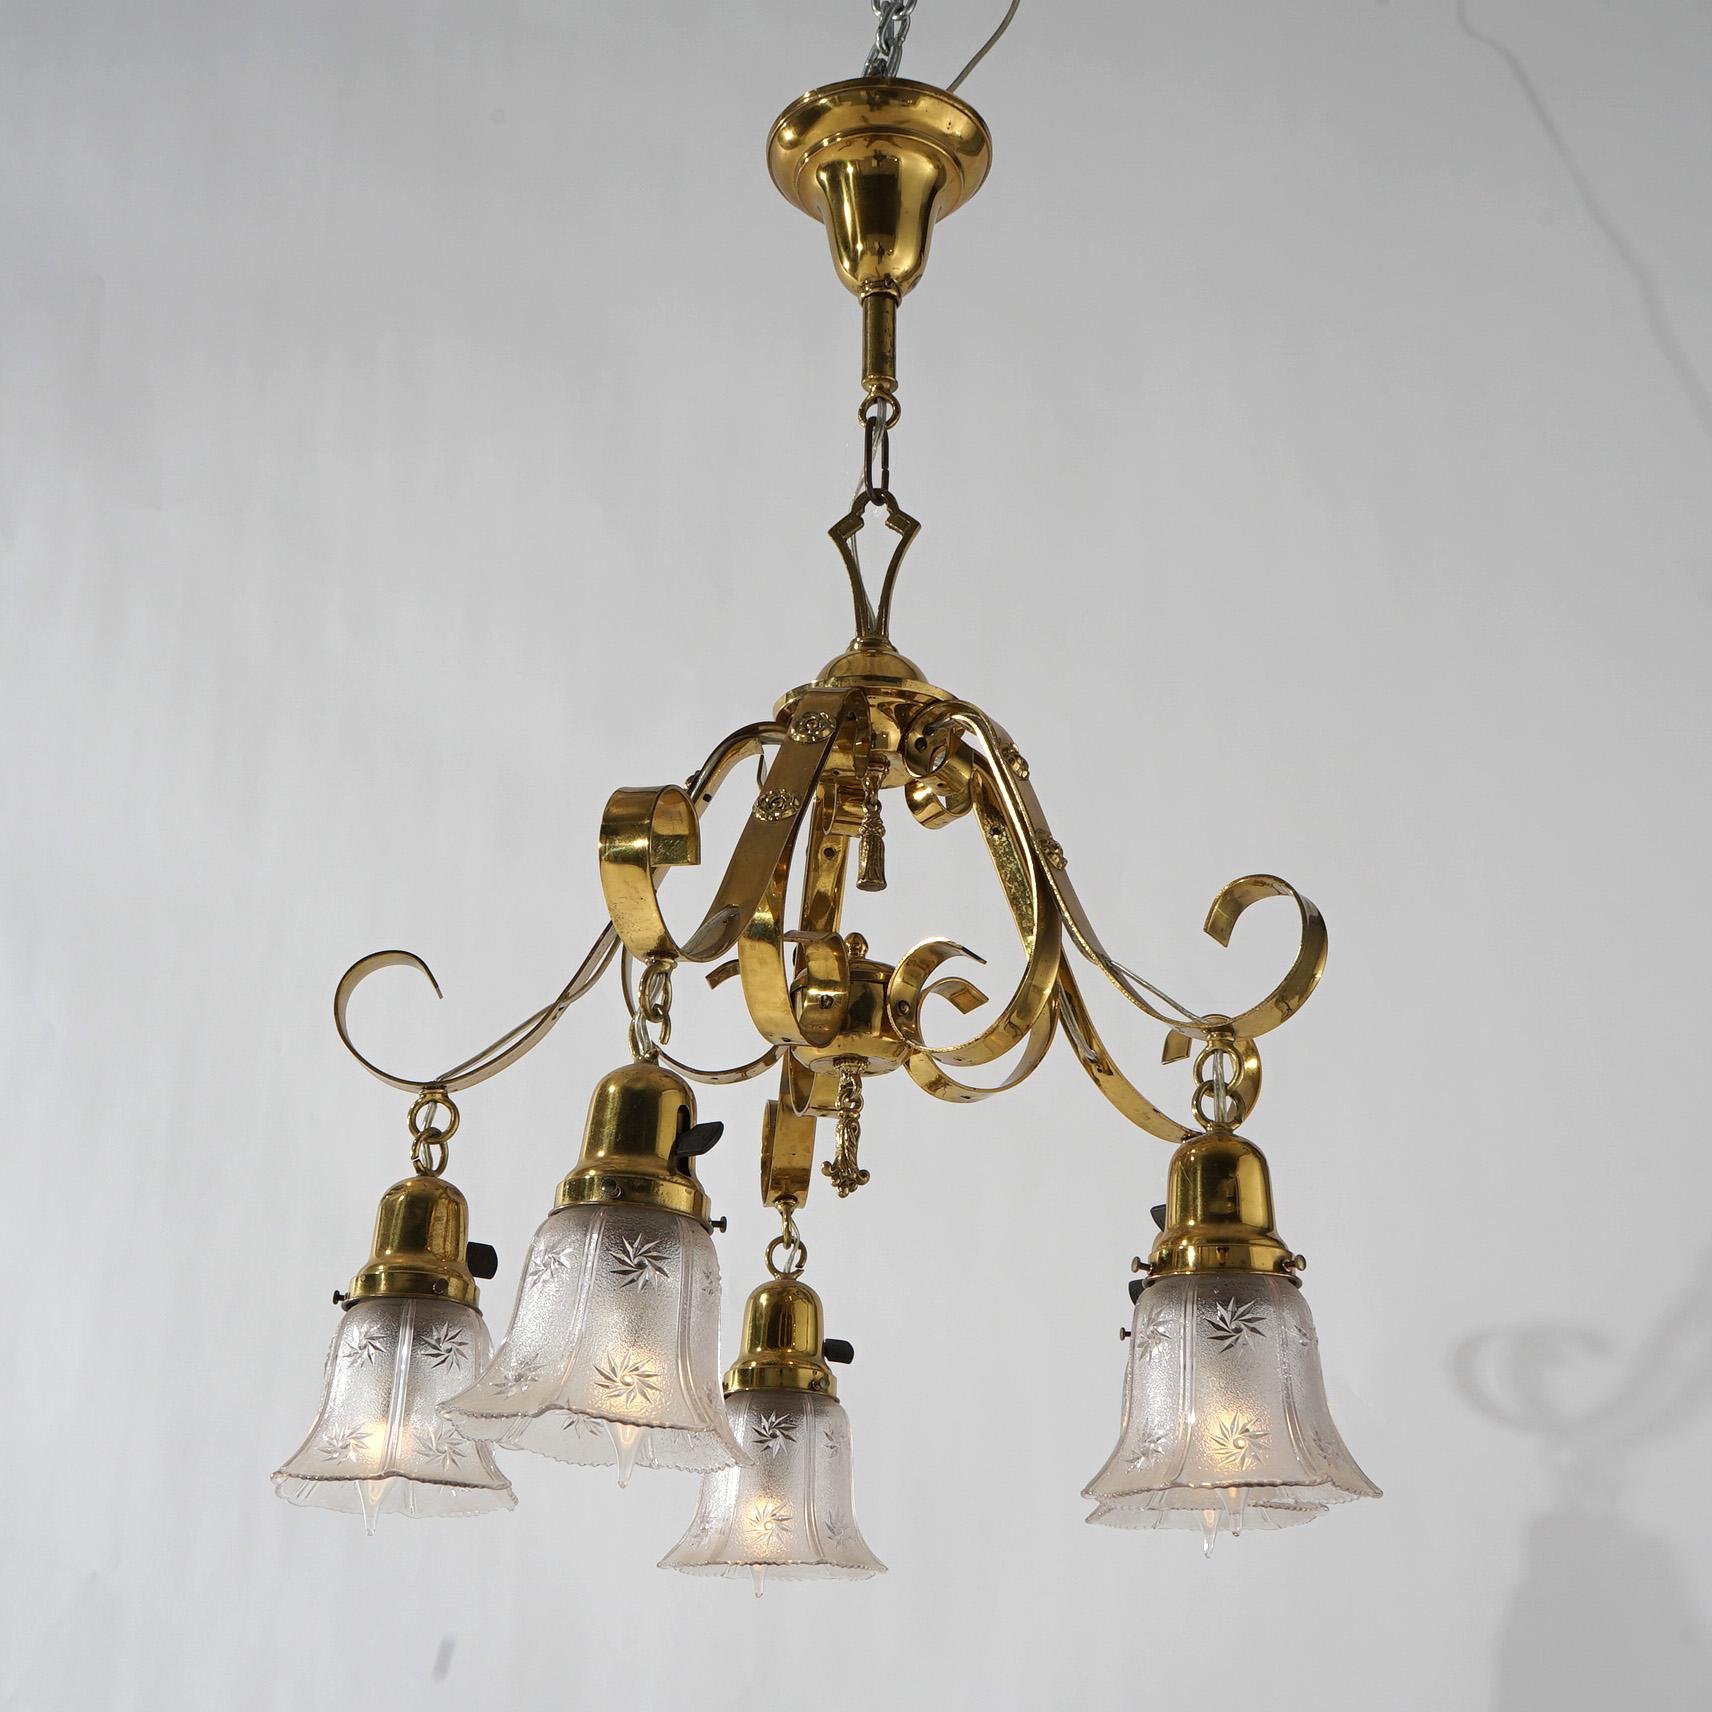 20th Century Antique Arts & Crafts Gilt Metal & Brass Hanging Fixture, Embossed Shades c1920 For Sale